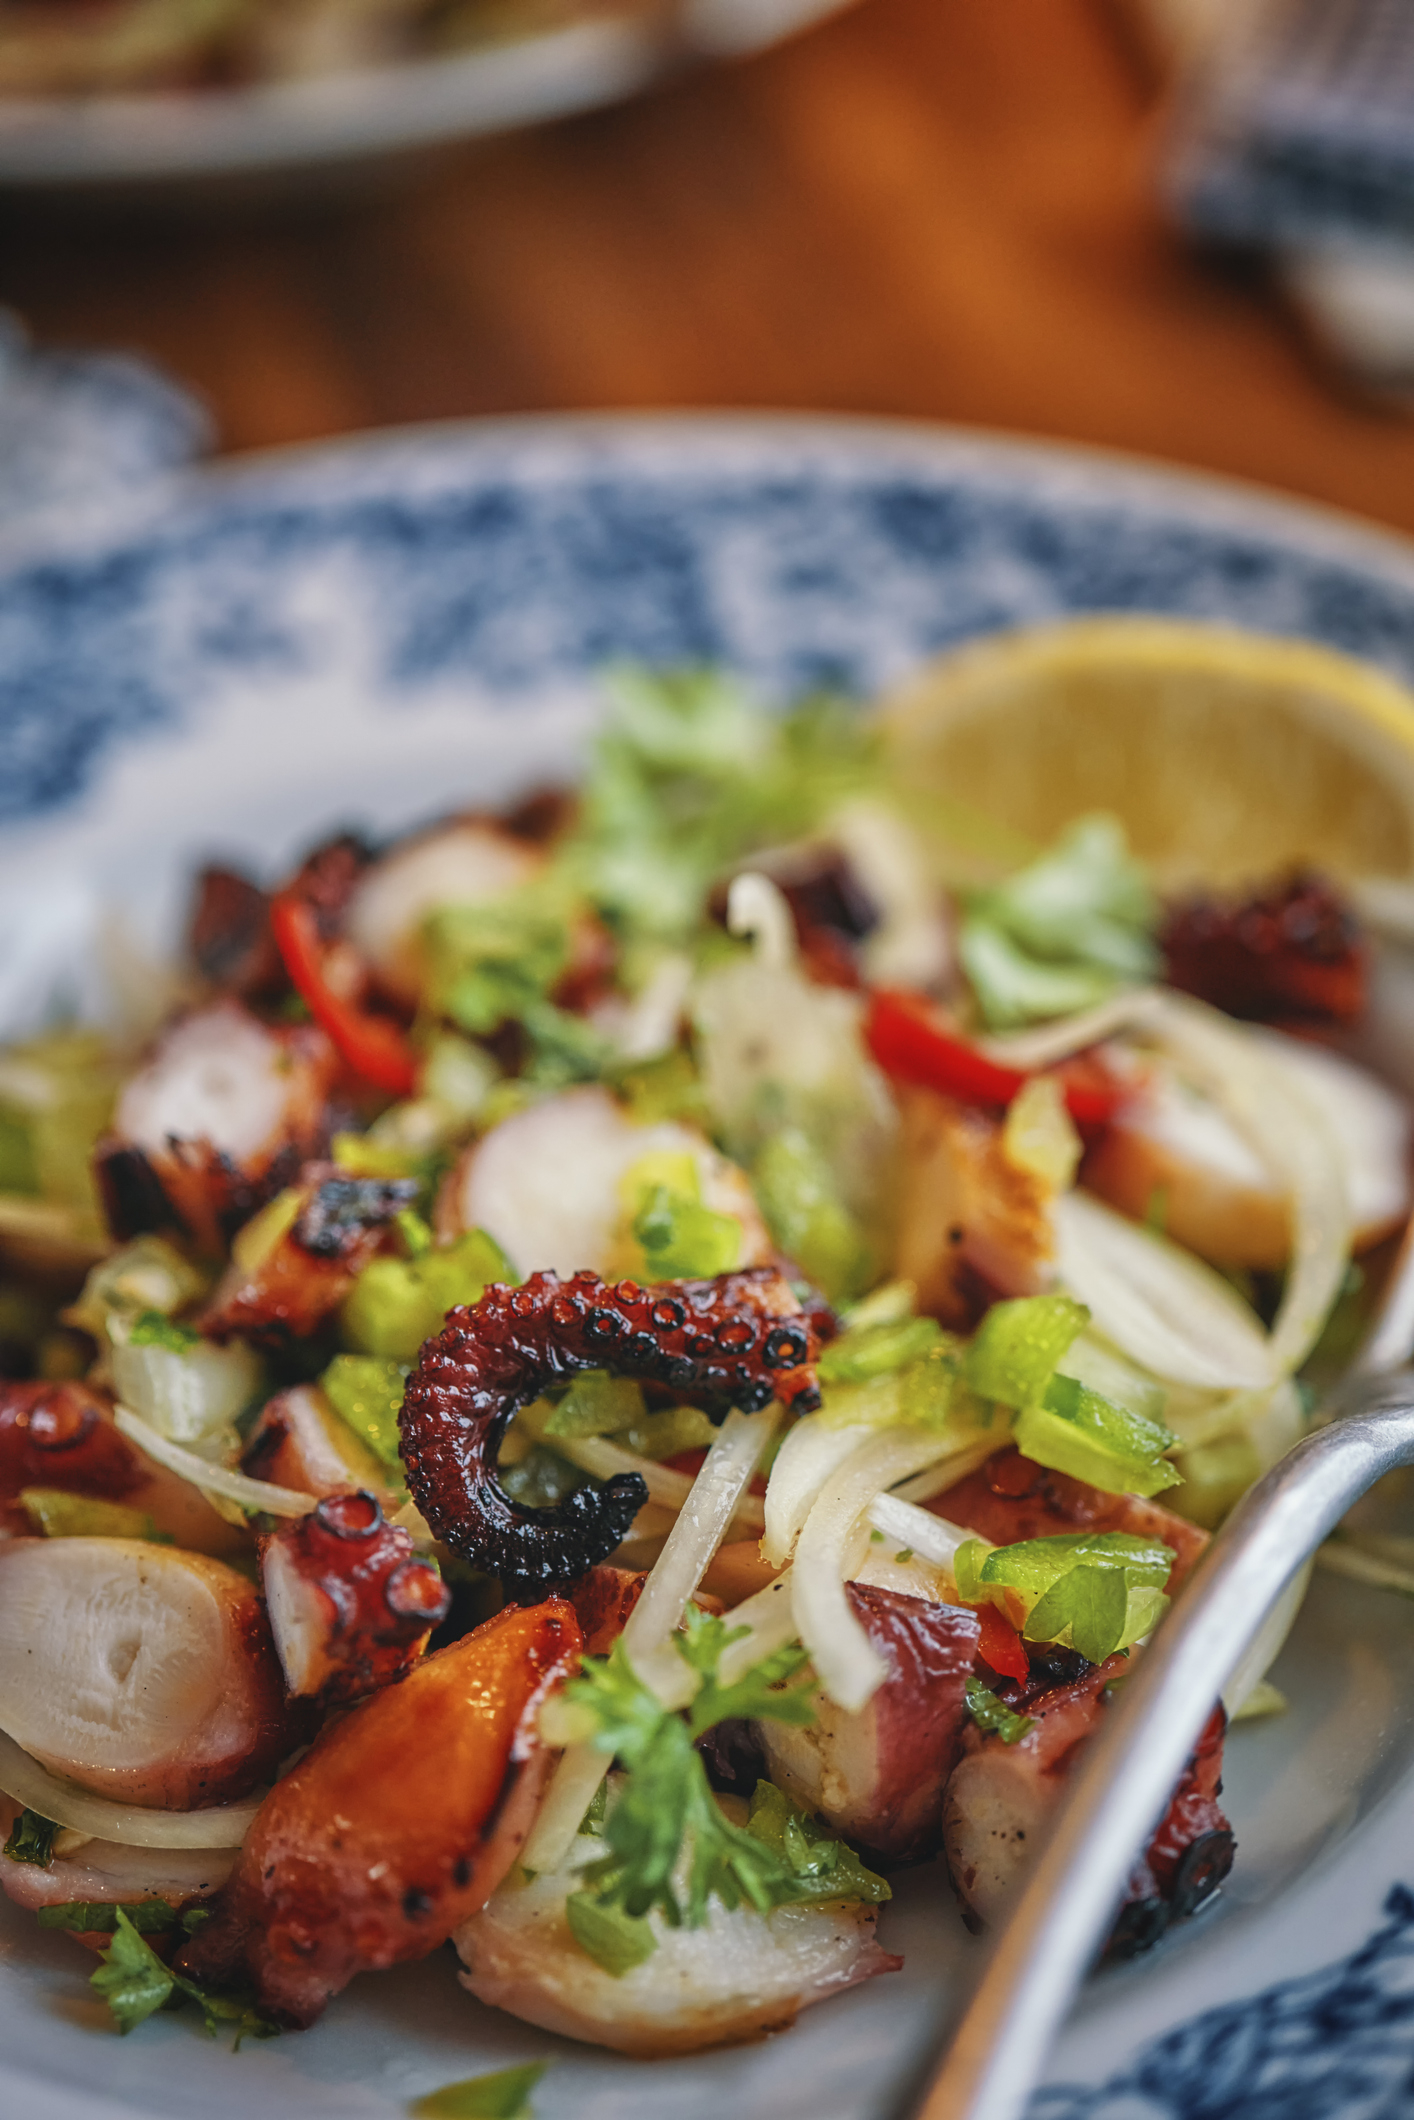 A close-up of a fresh octopus salad with sliced vegetables and a lemon wedge